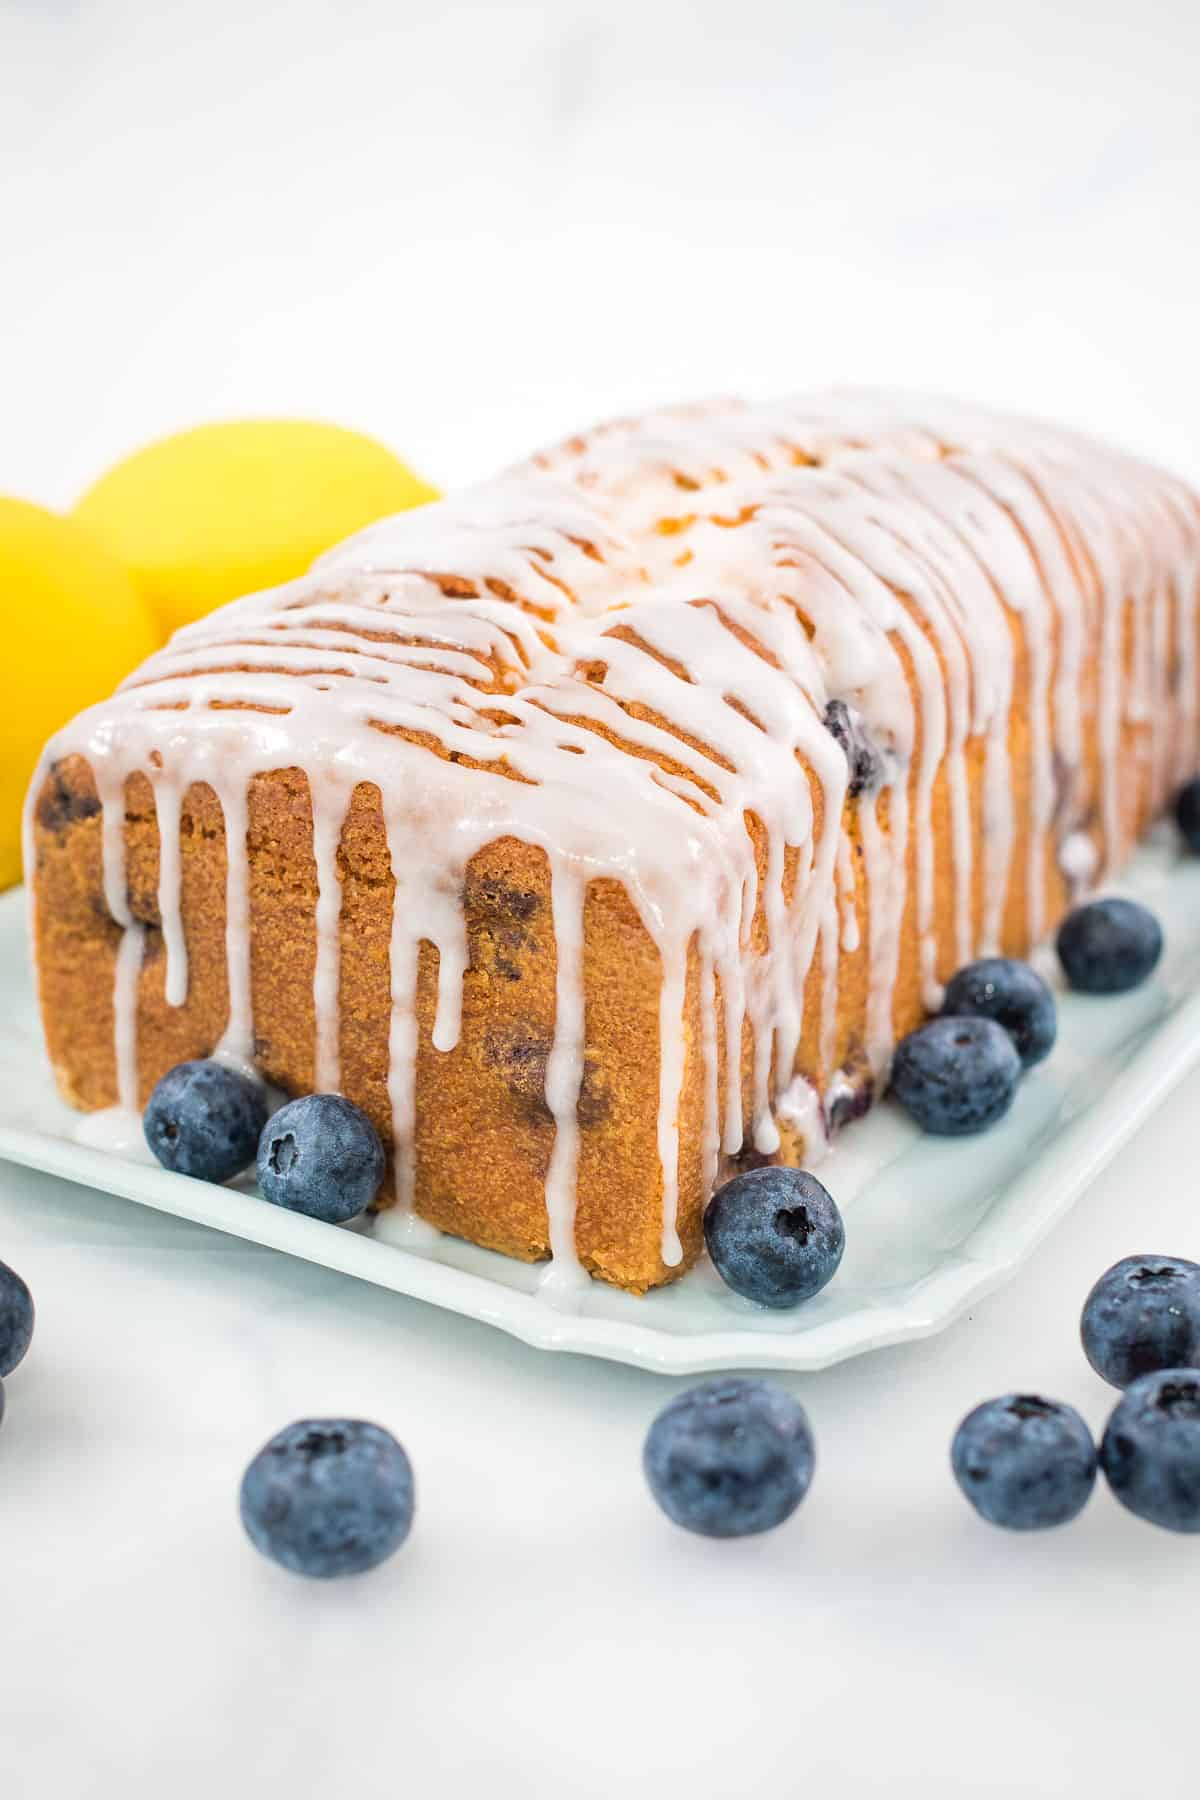 A loaf cake with glaze icing, blueberries and lemons on the side.